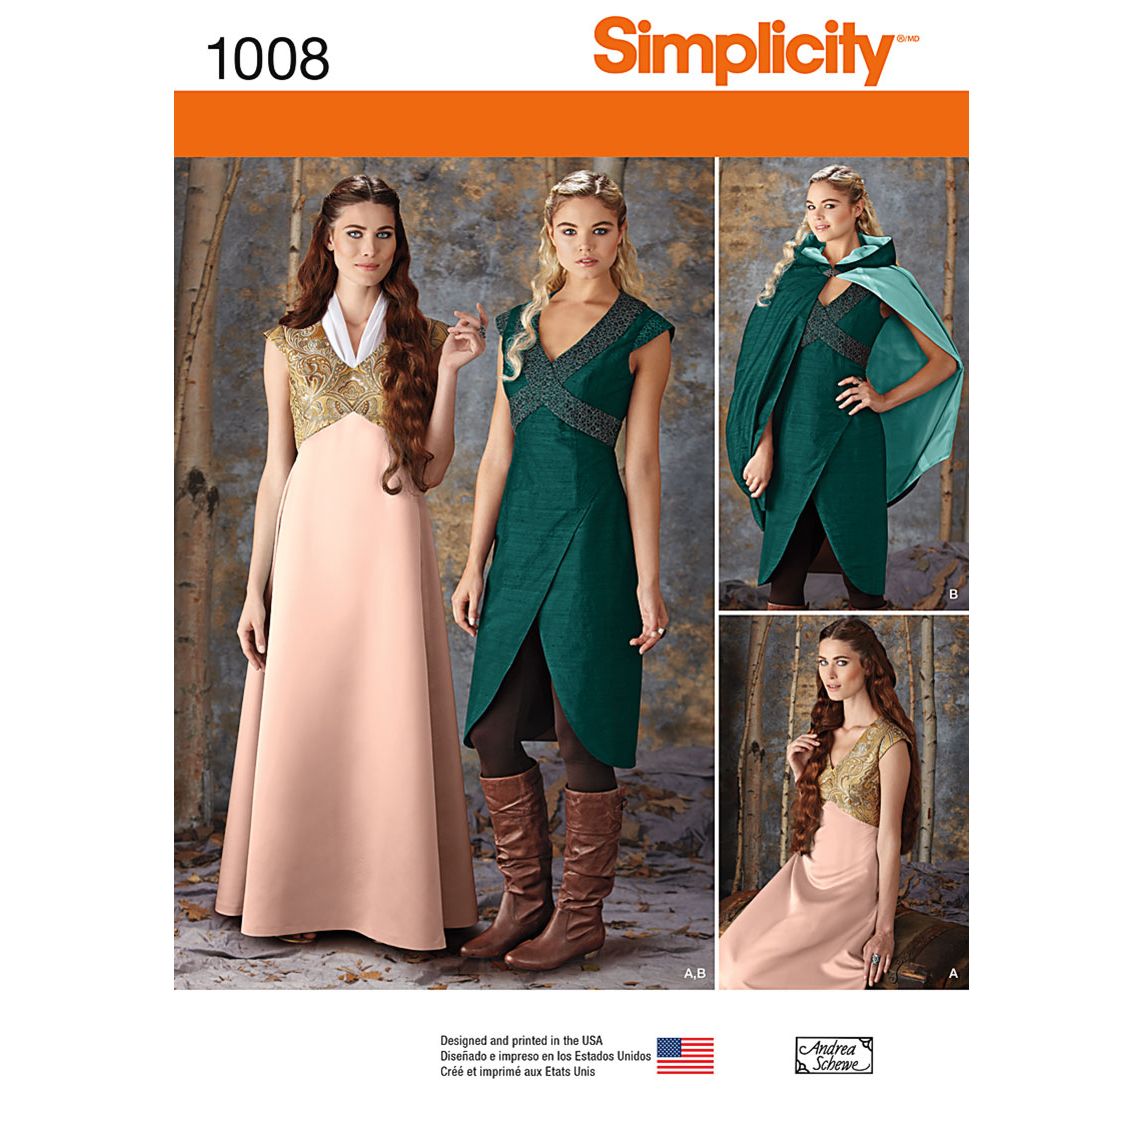 Simplicity Women's Fantasy Costumes Sewing Pattern, 1008